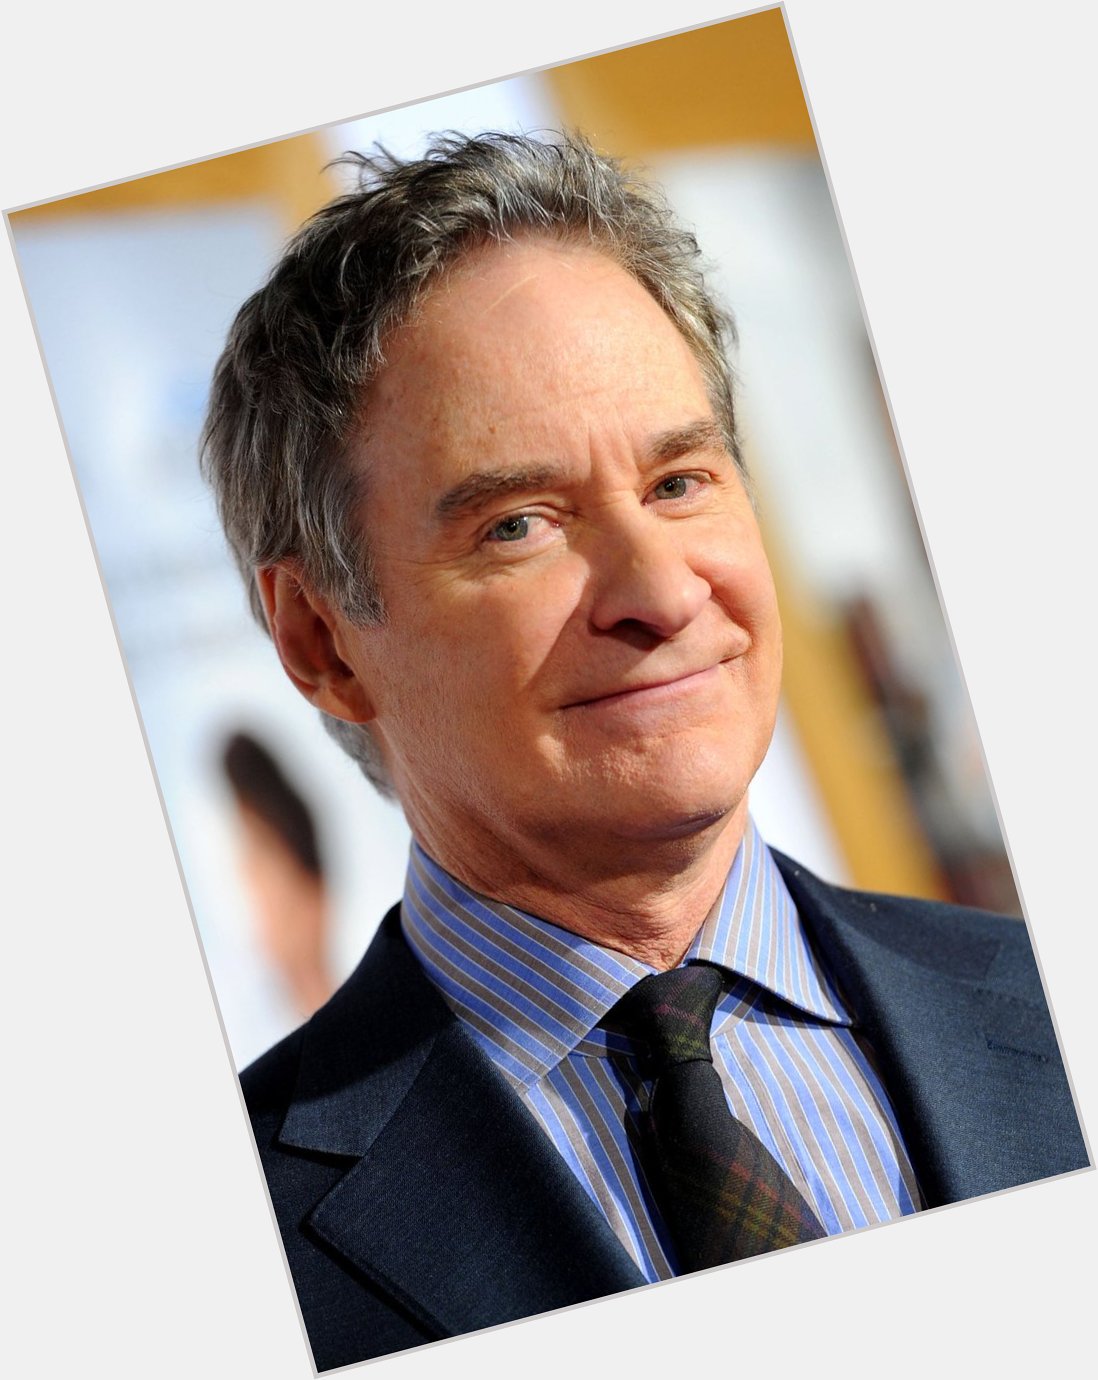 Happy Birthday to Kevin Kline who turns 73 today! 